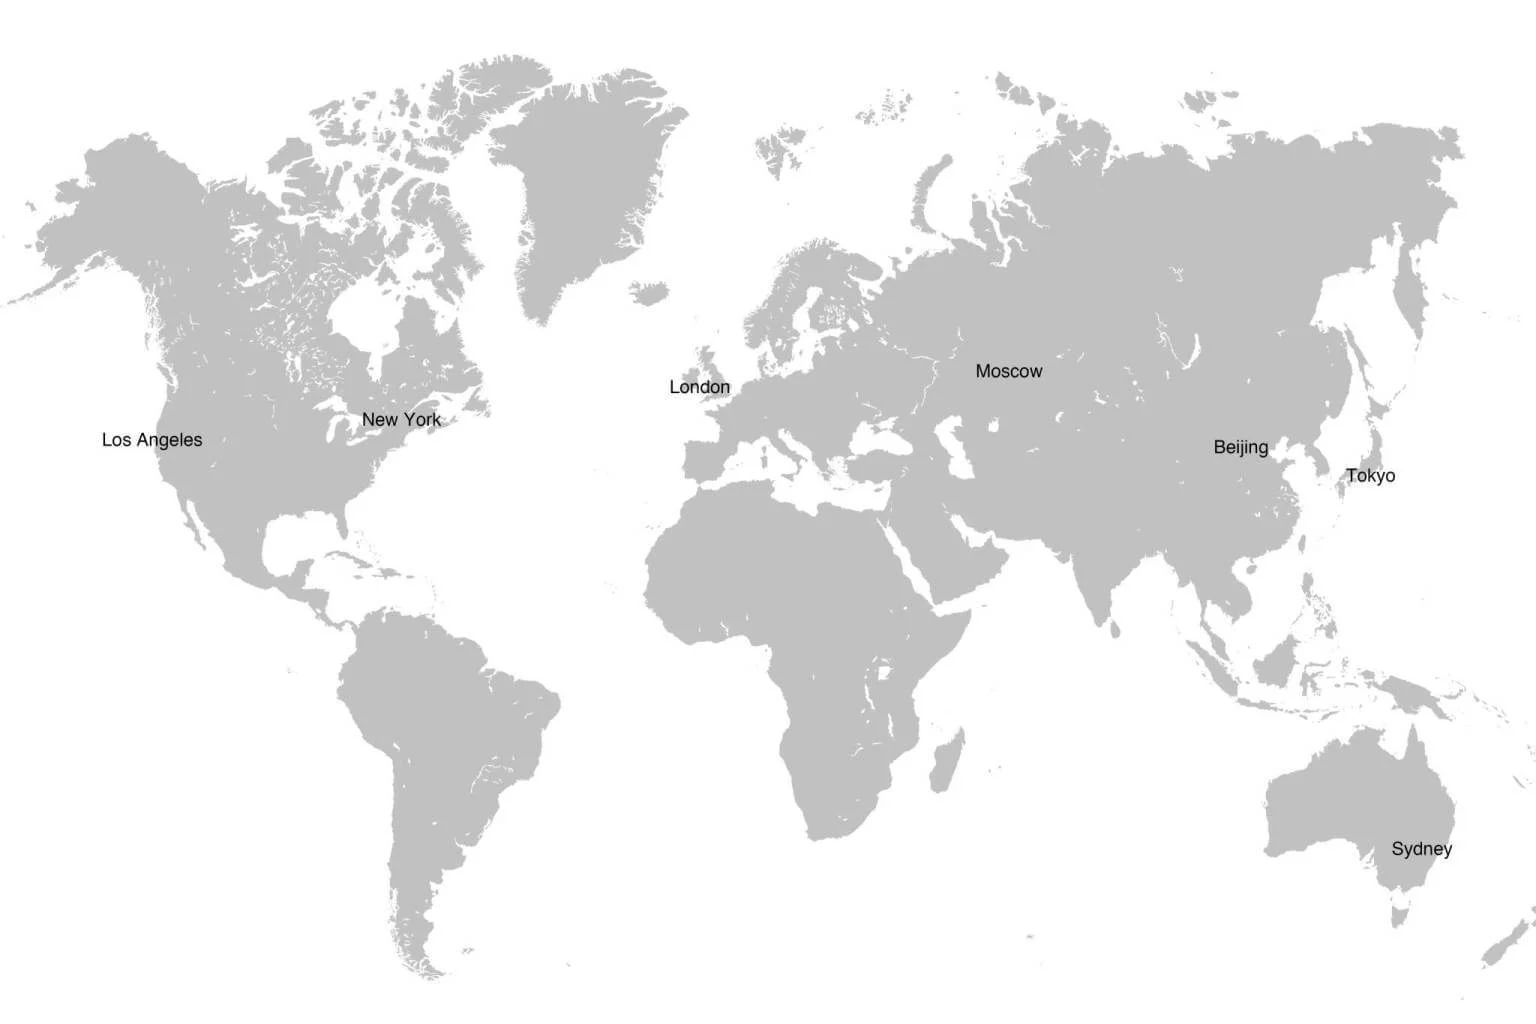 A gray world map with the countries marked.